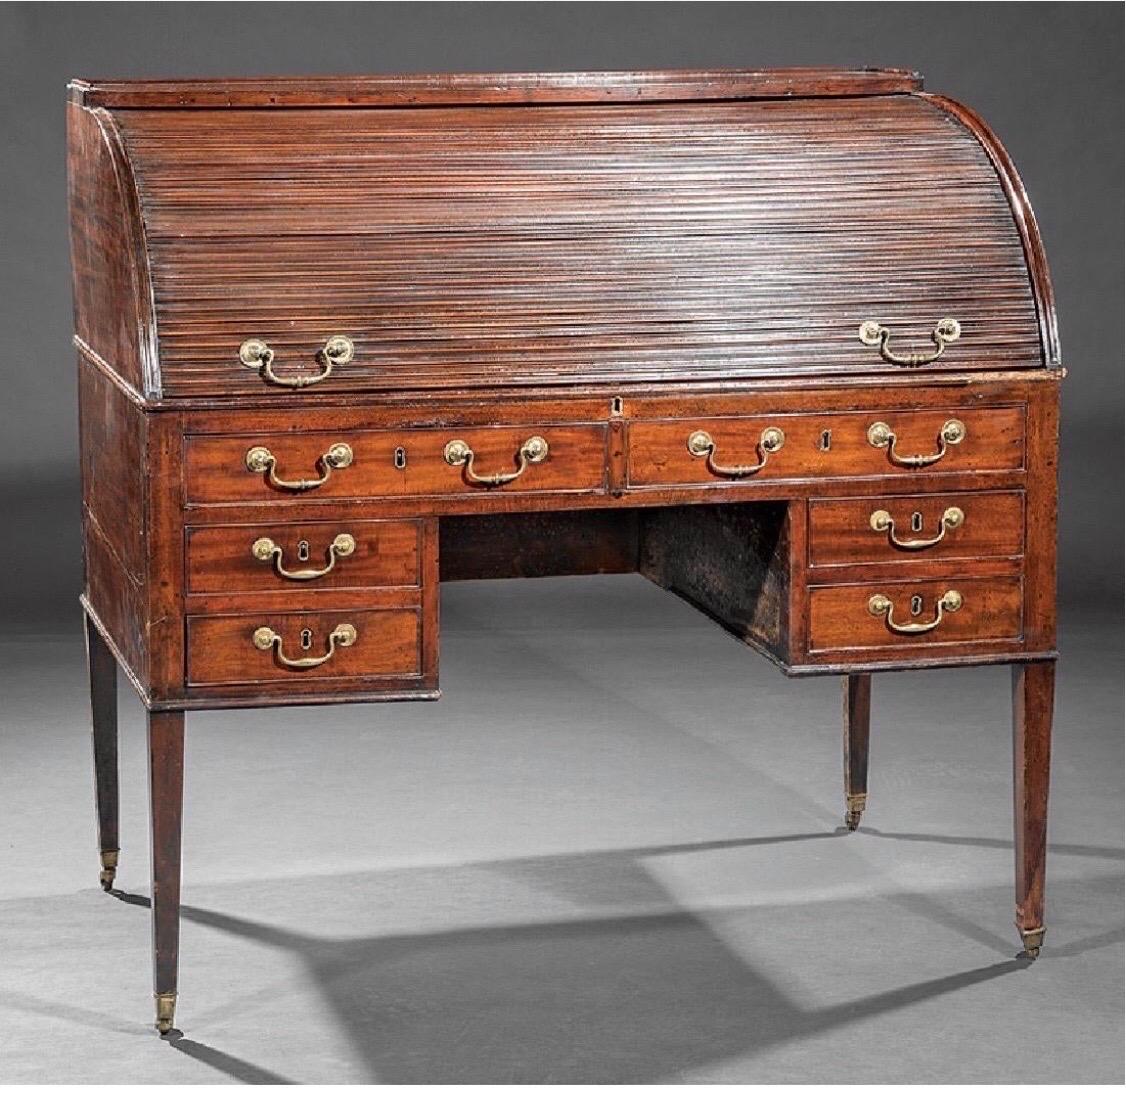 Late 18th-early 19th century Georgian mahogany tambour desk with green tooled leather writing surface, fitted interior, tapered legs and original castors.

 